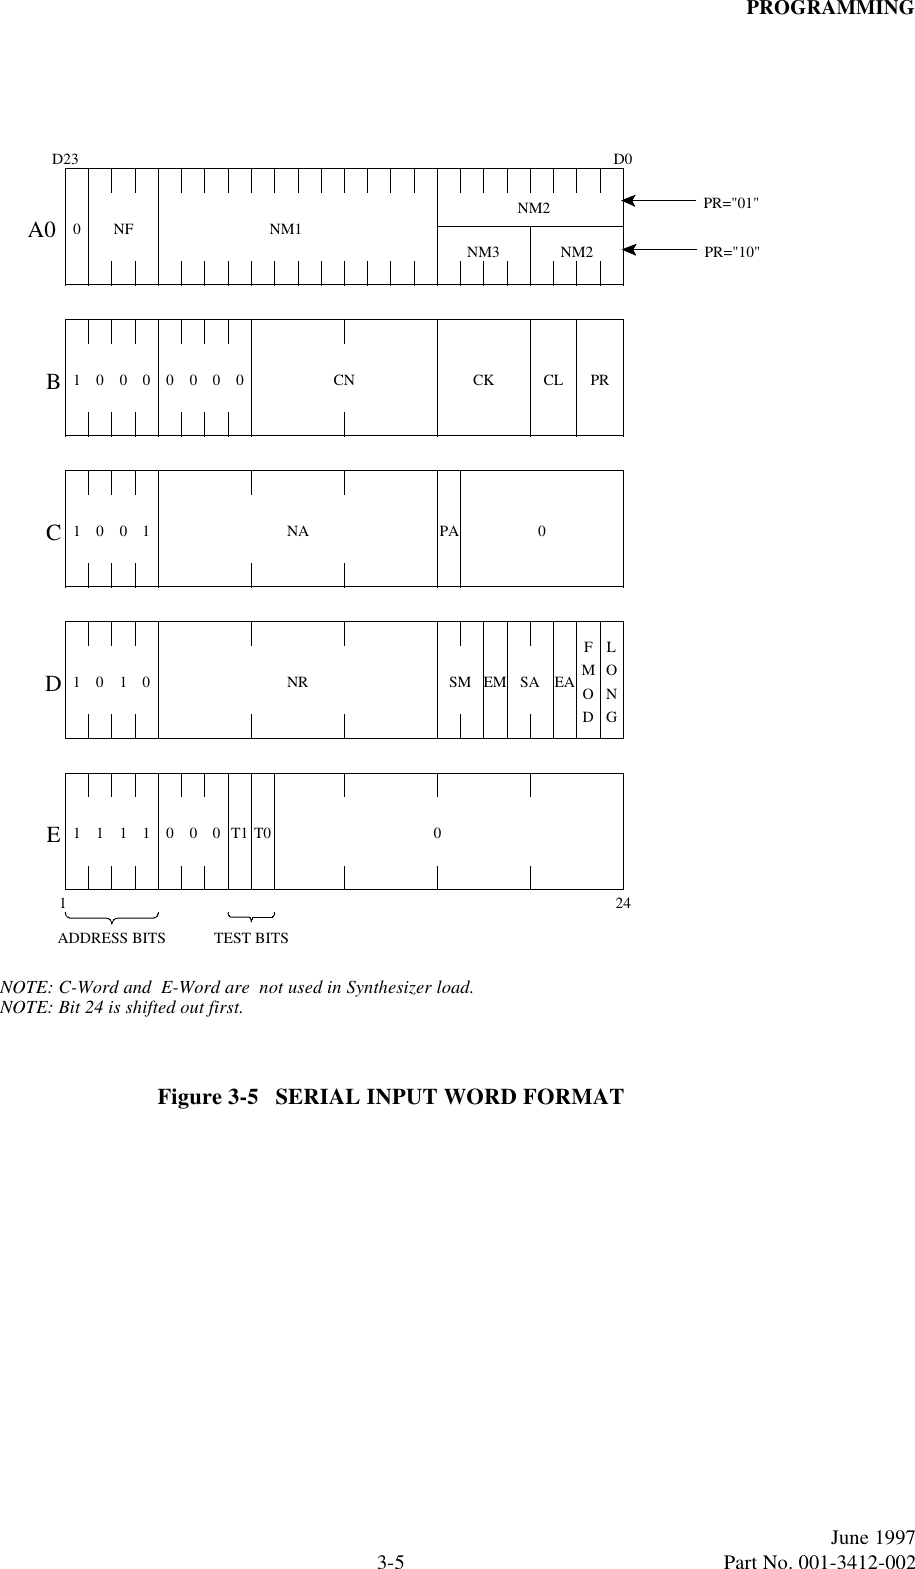 PROGRAMMING3-5June 1997   Part No. 001-3412-002Figure 3-5   SERIAL INPUT WORD FORMATD0D23A0BCDE0NF NM1NM3 NM20 0 0 0 0 0 01 CN CK CL PRPR=&quot;10&quot;0 01 1 NA PA 001 01 NR SM EM SA EAFMODLONG1 11 1 0 0 0 T1 T0 0ADDRESS BITS TEST BITS124NOTE: C-Word and  E-Word are  not used in Synthesizer load.NM2 PR=&quot;01&quot;NOTE: Bit 24 is shifted out first.